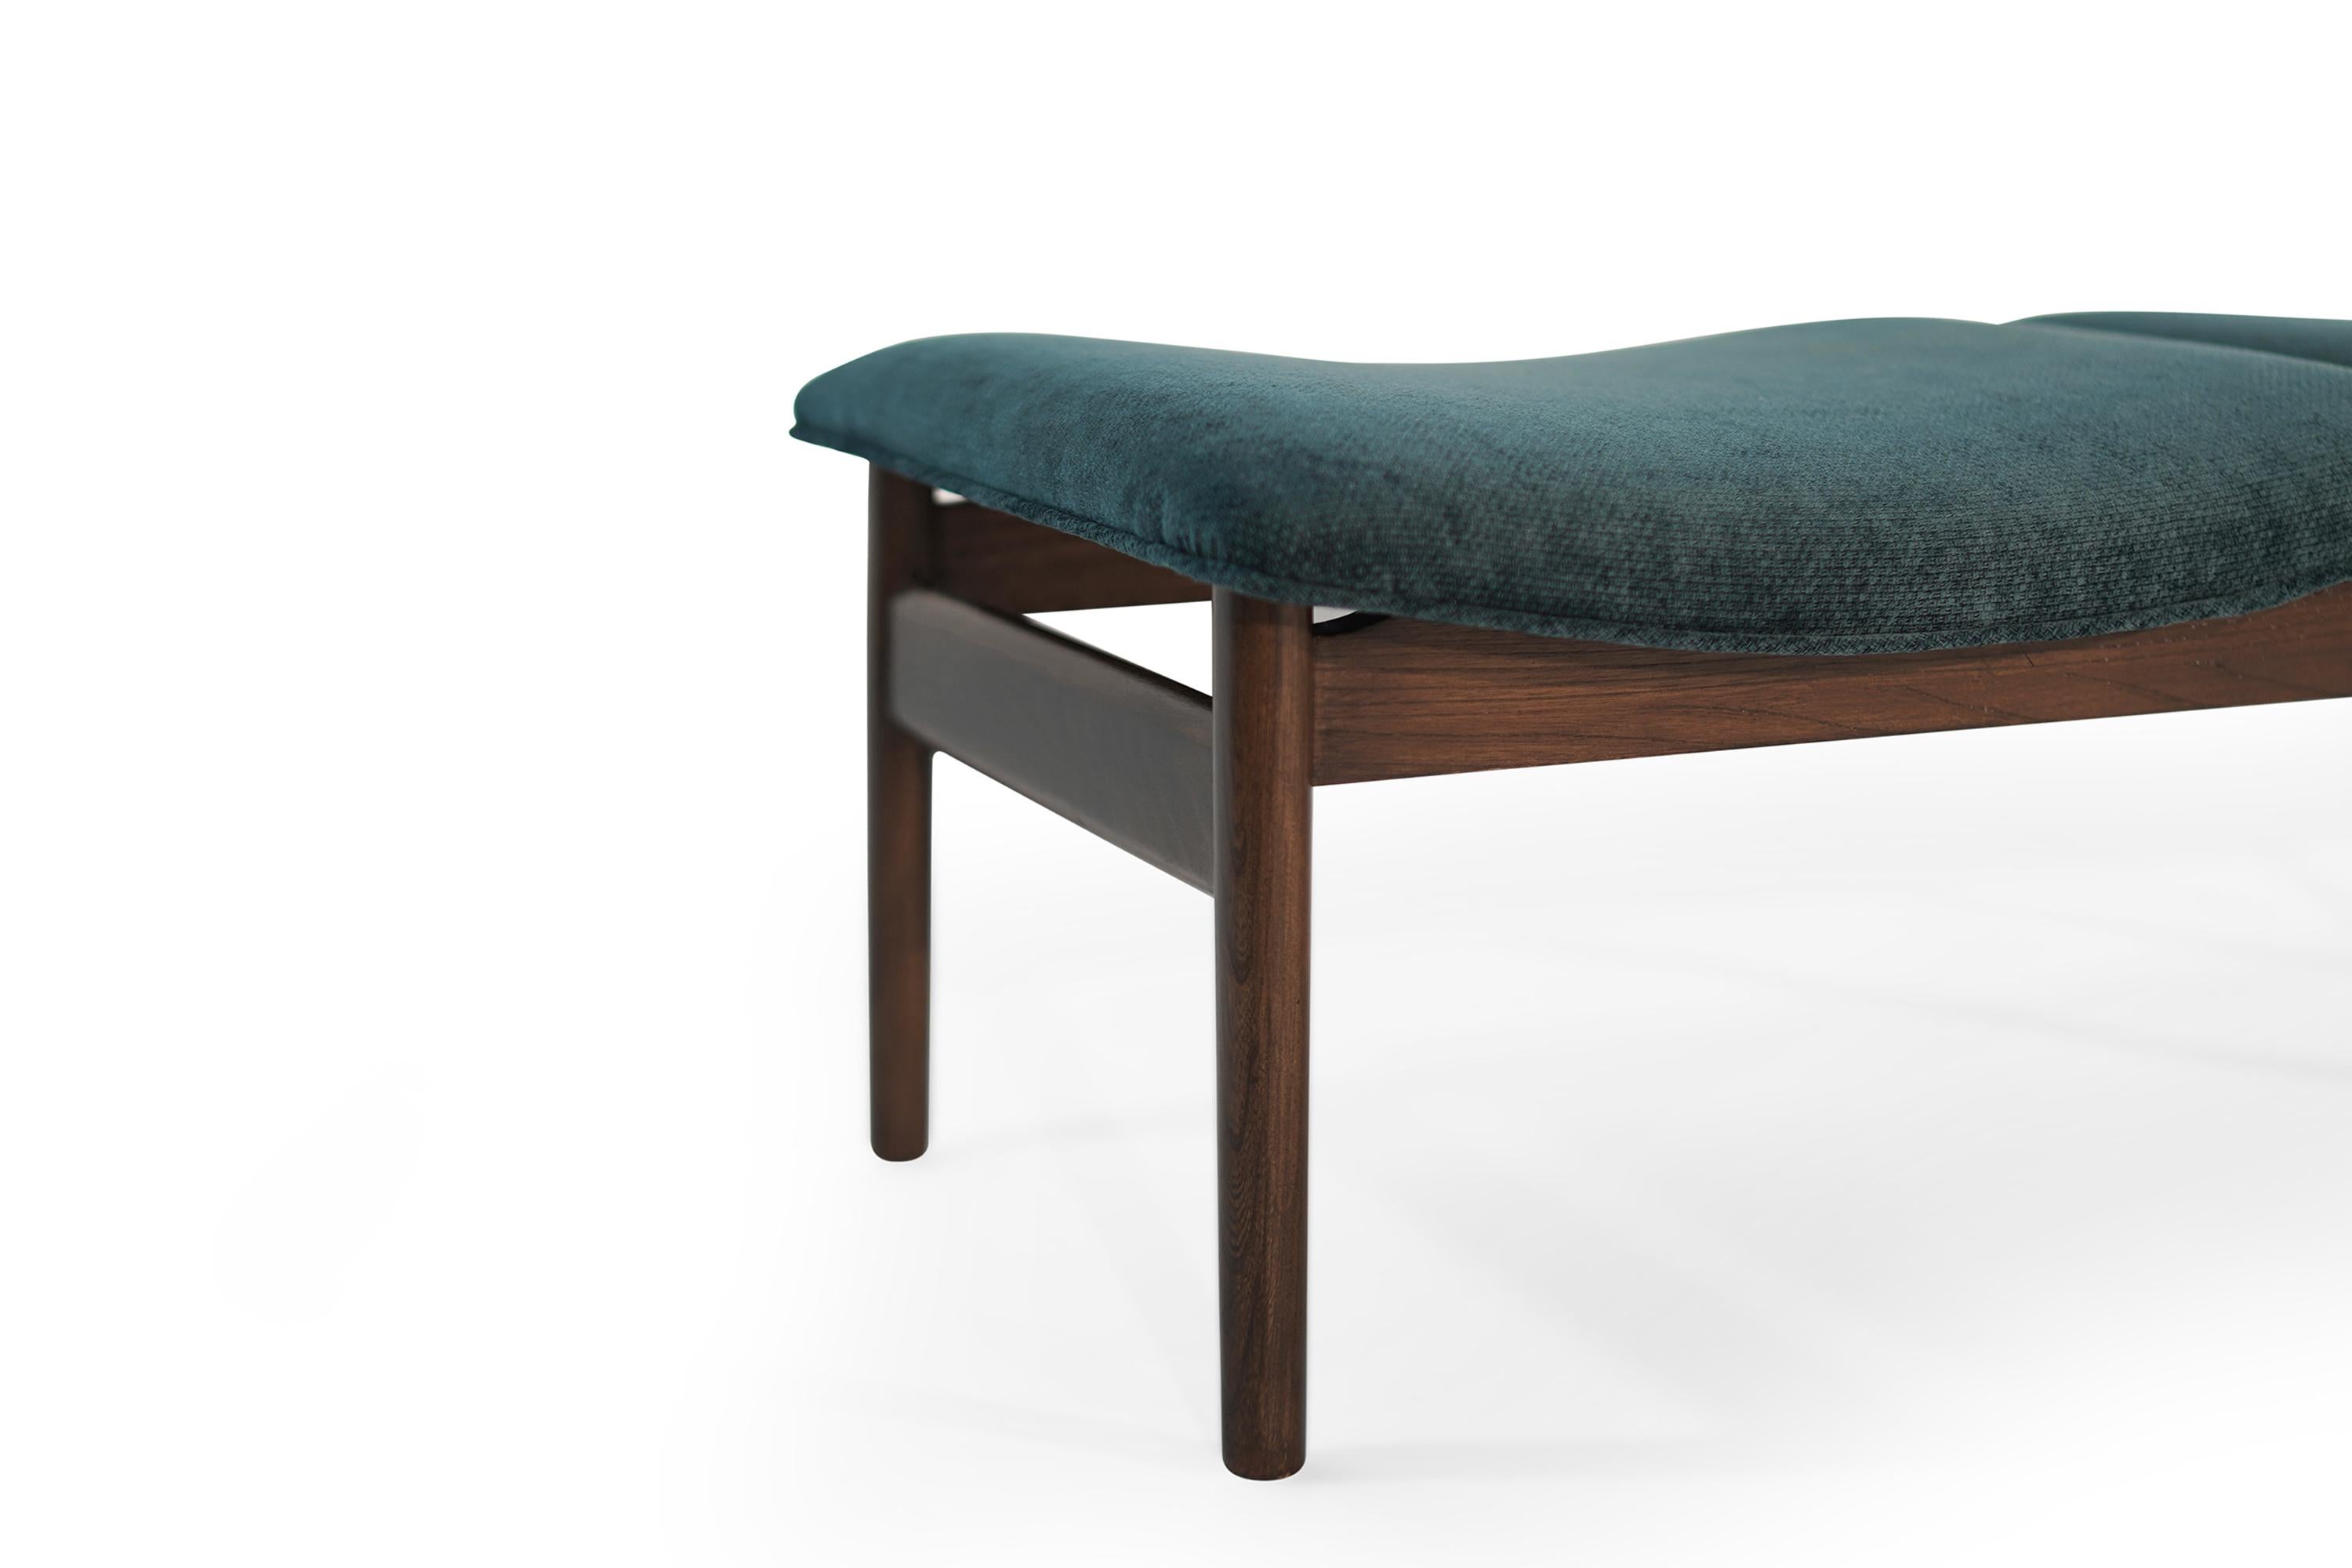 Lawrence Peabody Bench in Teal Twill, 1950s 4